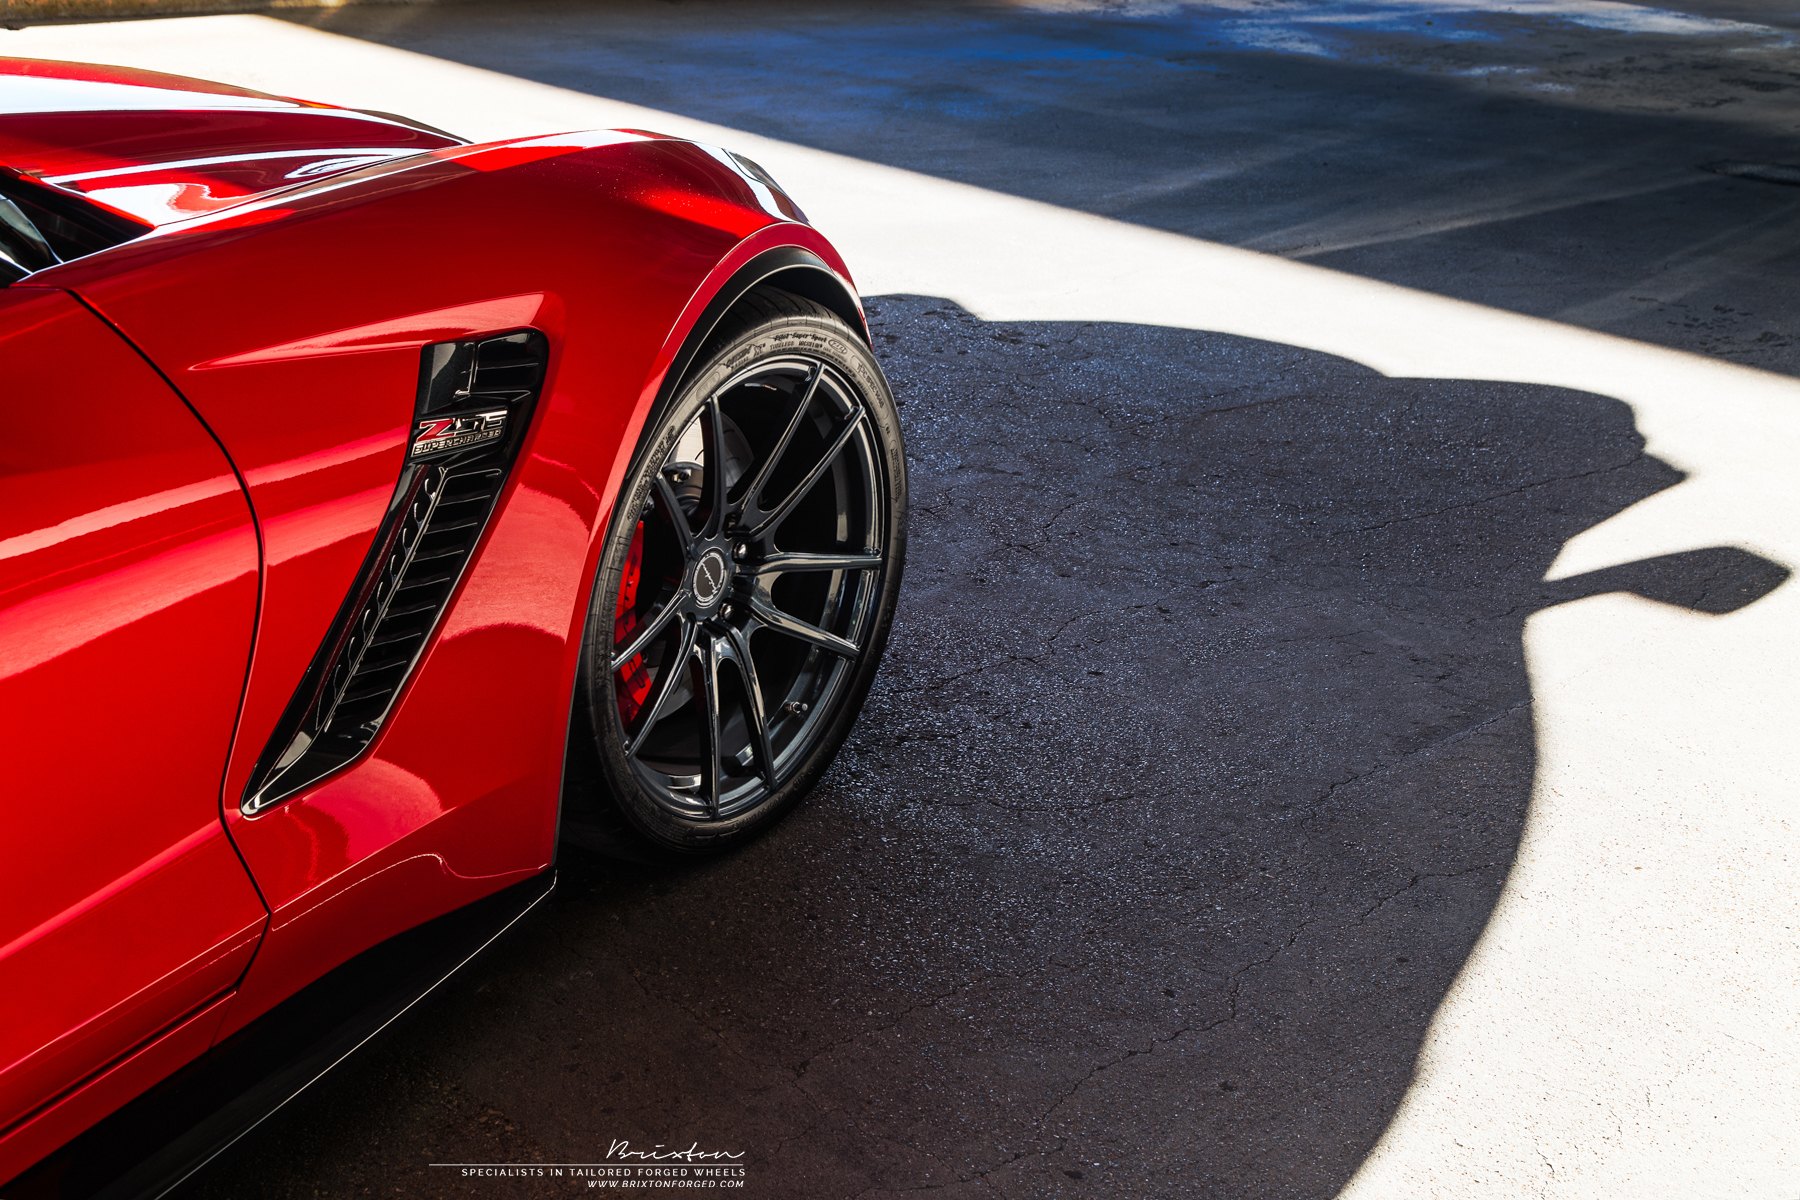 Red Chevy Corvette Z06 with Brixton Forged Wheels - Photo by Brixton Forged Wheels